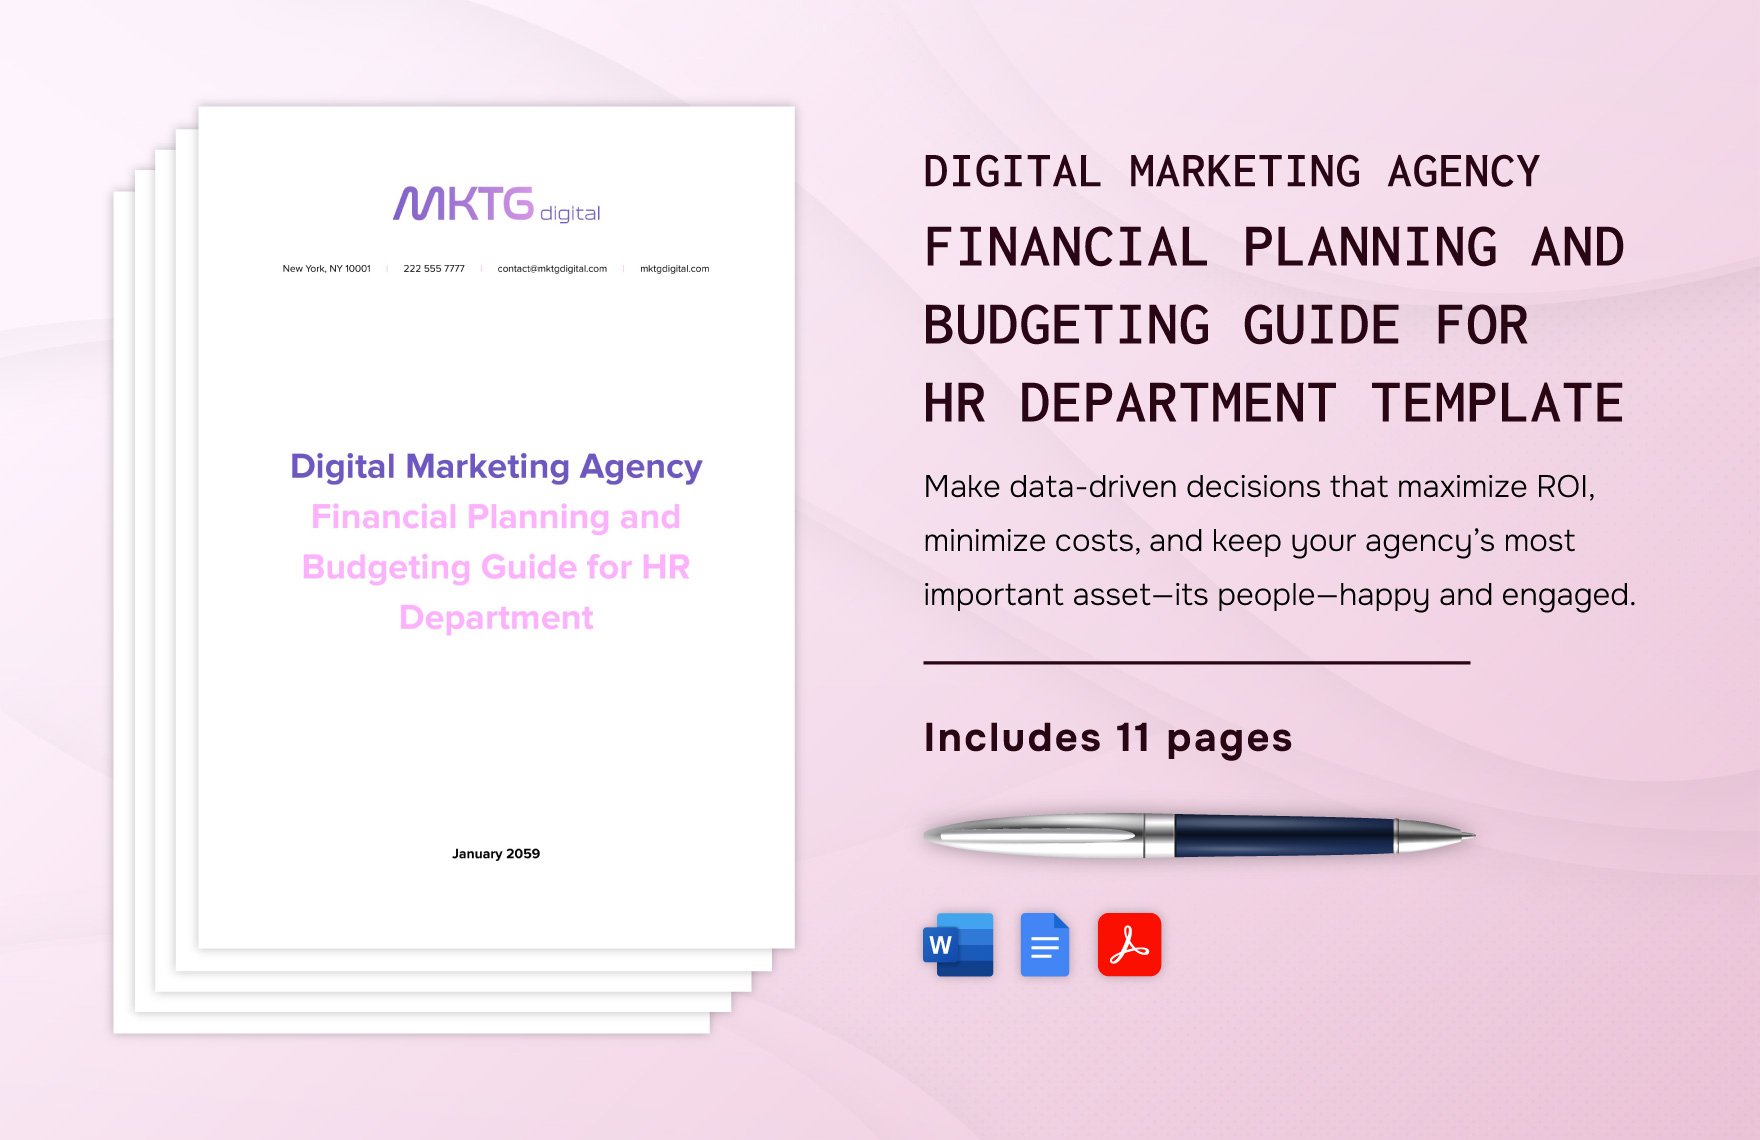 Digital Marketing Agency Financial Planning and Budgeting Guide for HR Department Template